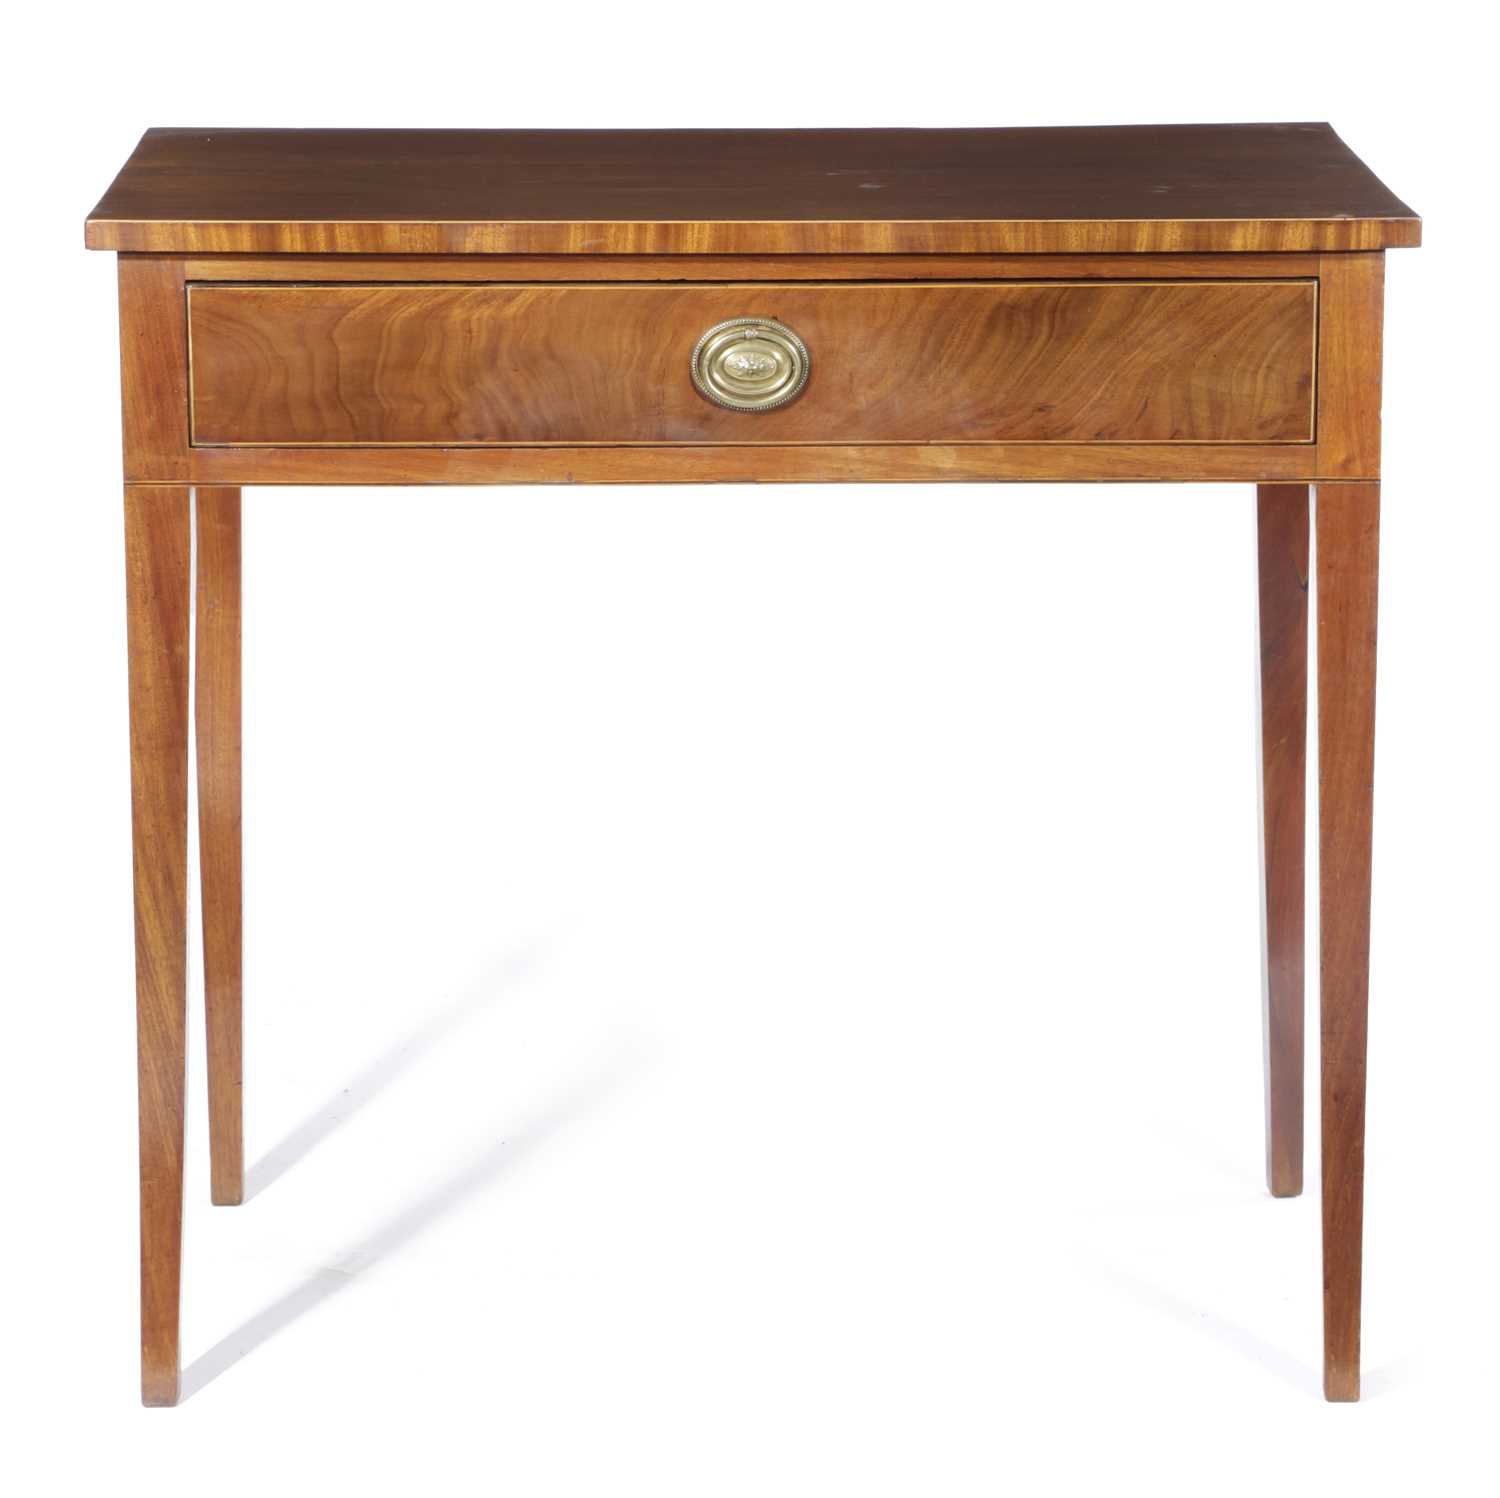 A GEORGE III MAHOGANY SIDE TABLE LATE 18TH / EARLY 19TH CENTURY with a frieze drawer on square